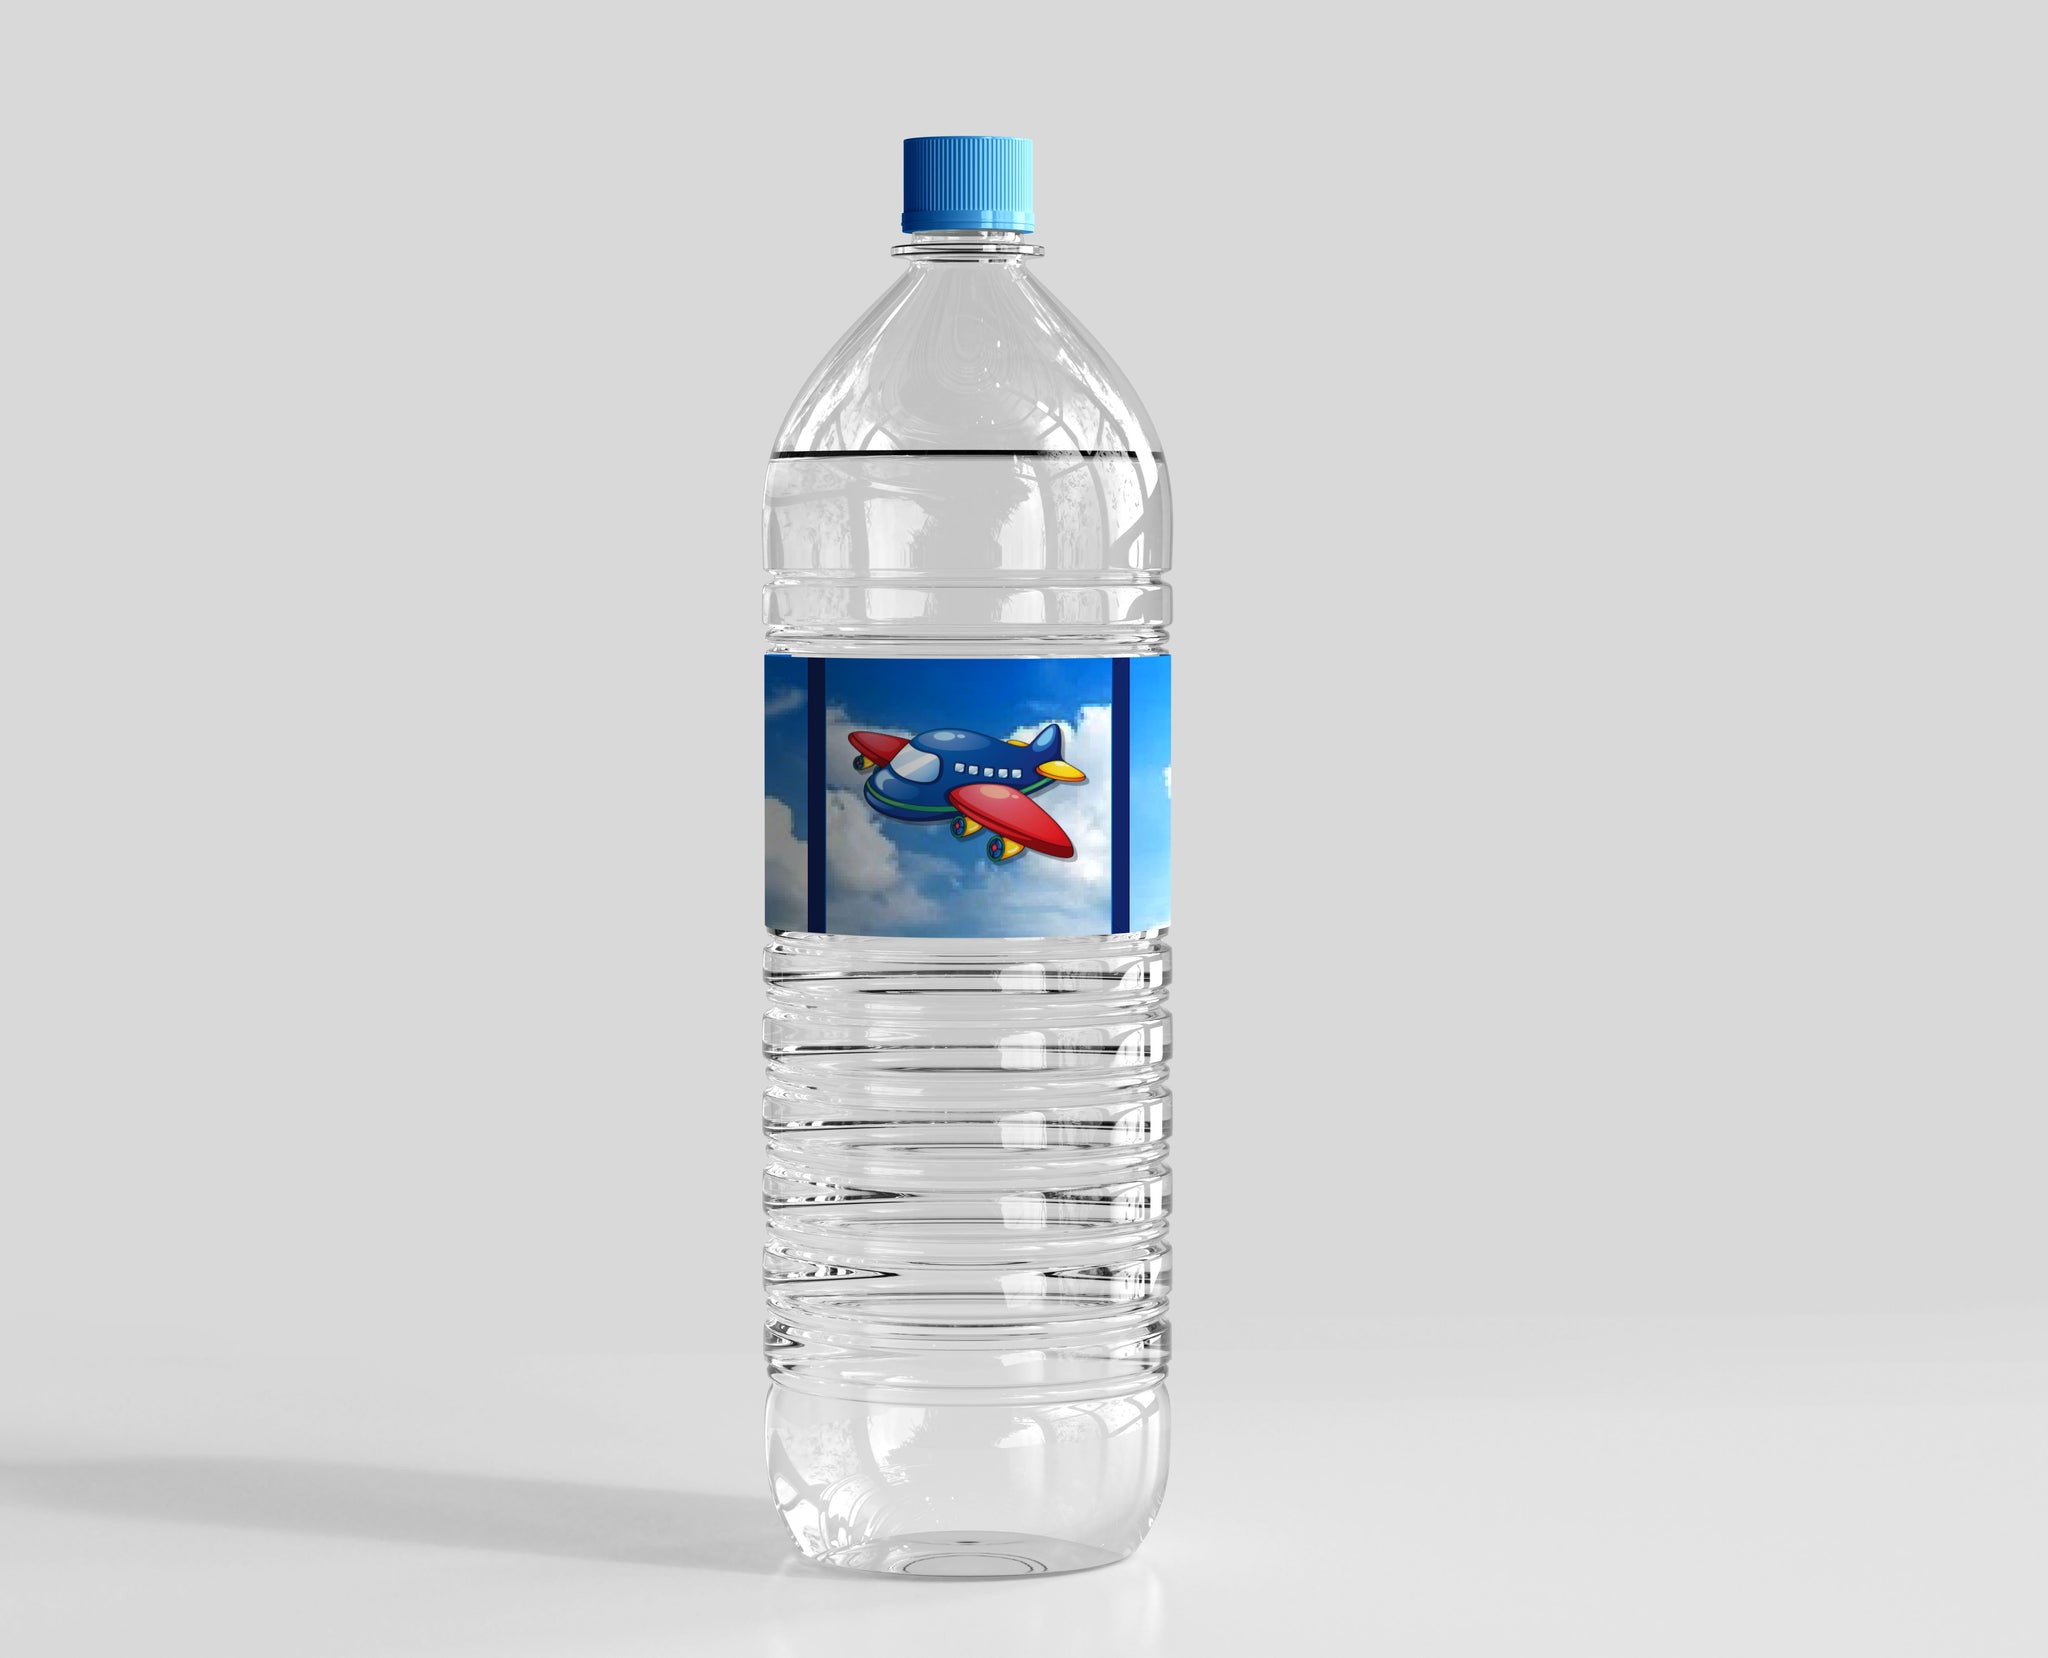 Airplane Party Water Bottle Labels template